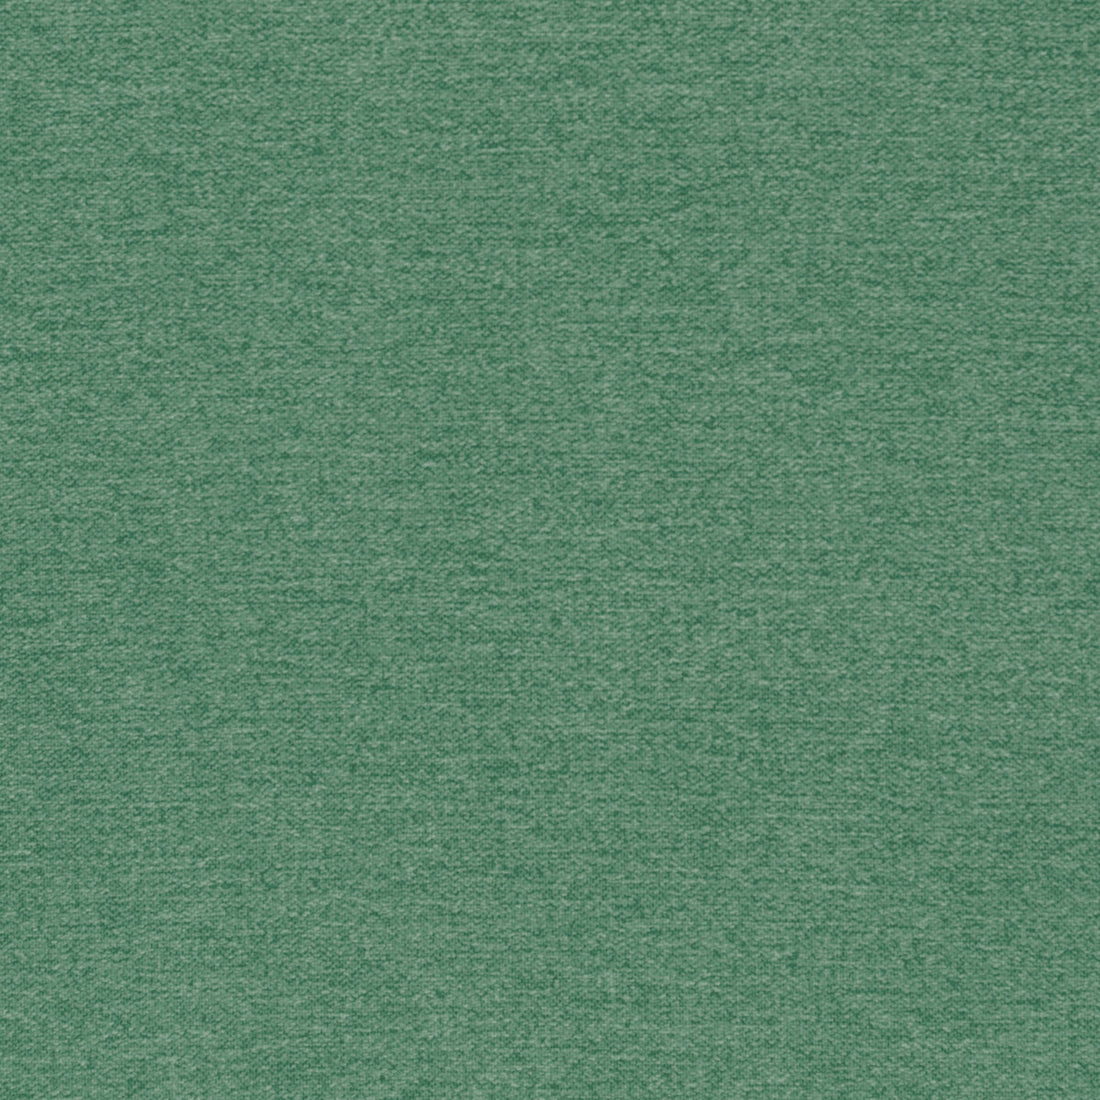 Hurdle fabric in spearmint color - pattern 36259.3.0 - by Kravet Contract in the Supreen collection